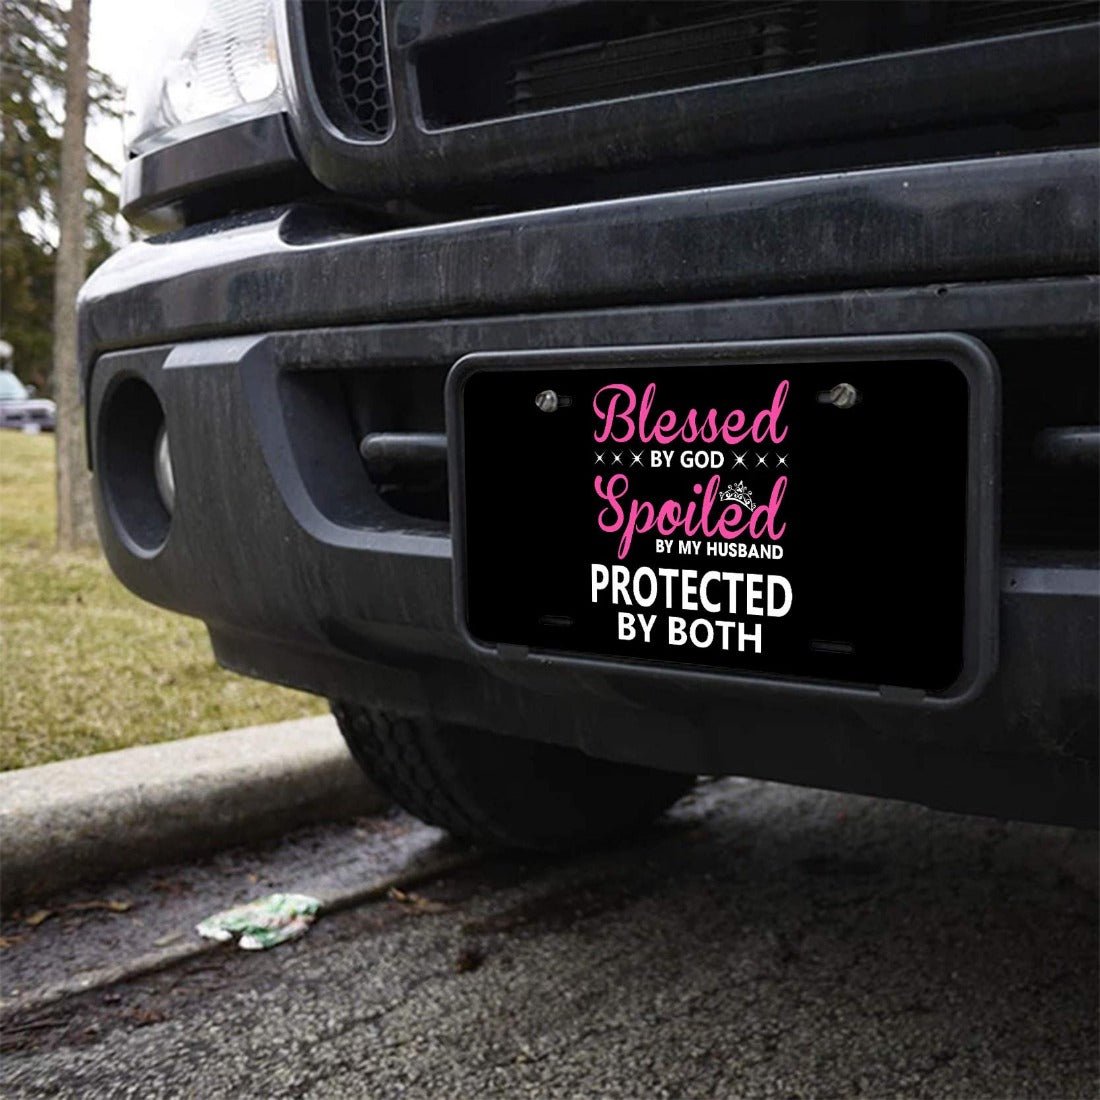 Blessed By God Spoiled By My Husband Protected By Both Christian Front License Plate 6*12in/15*30cm claimedbygoddesigns